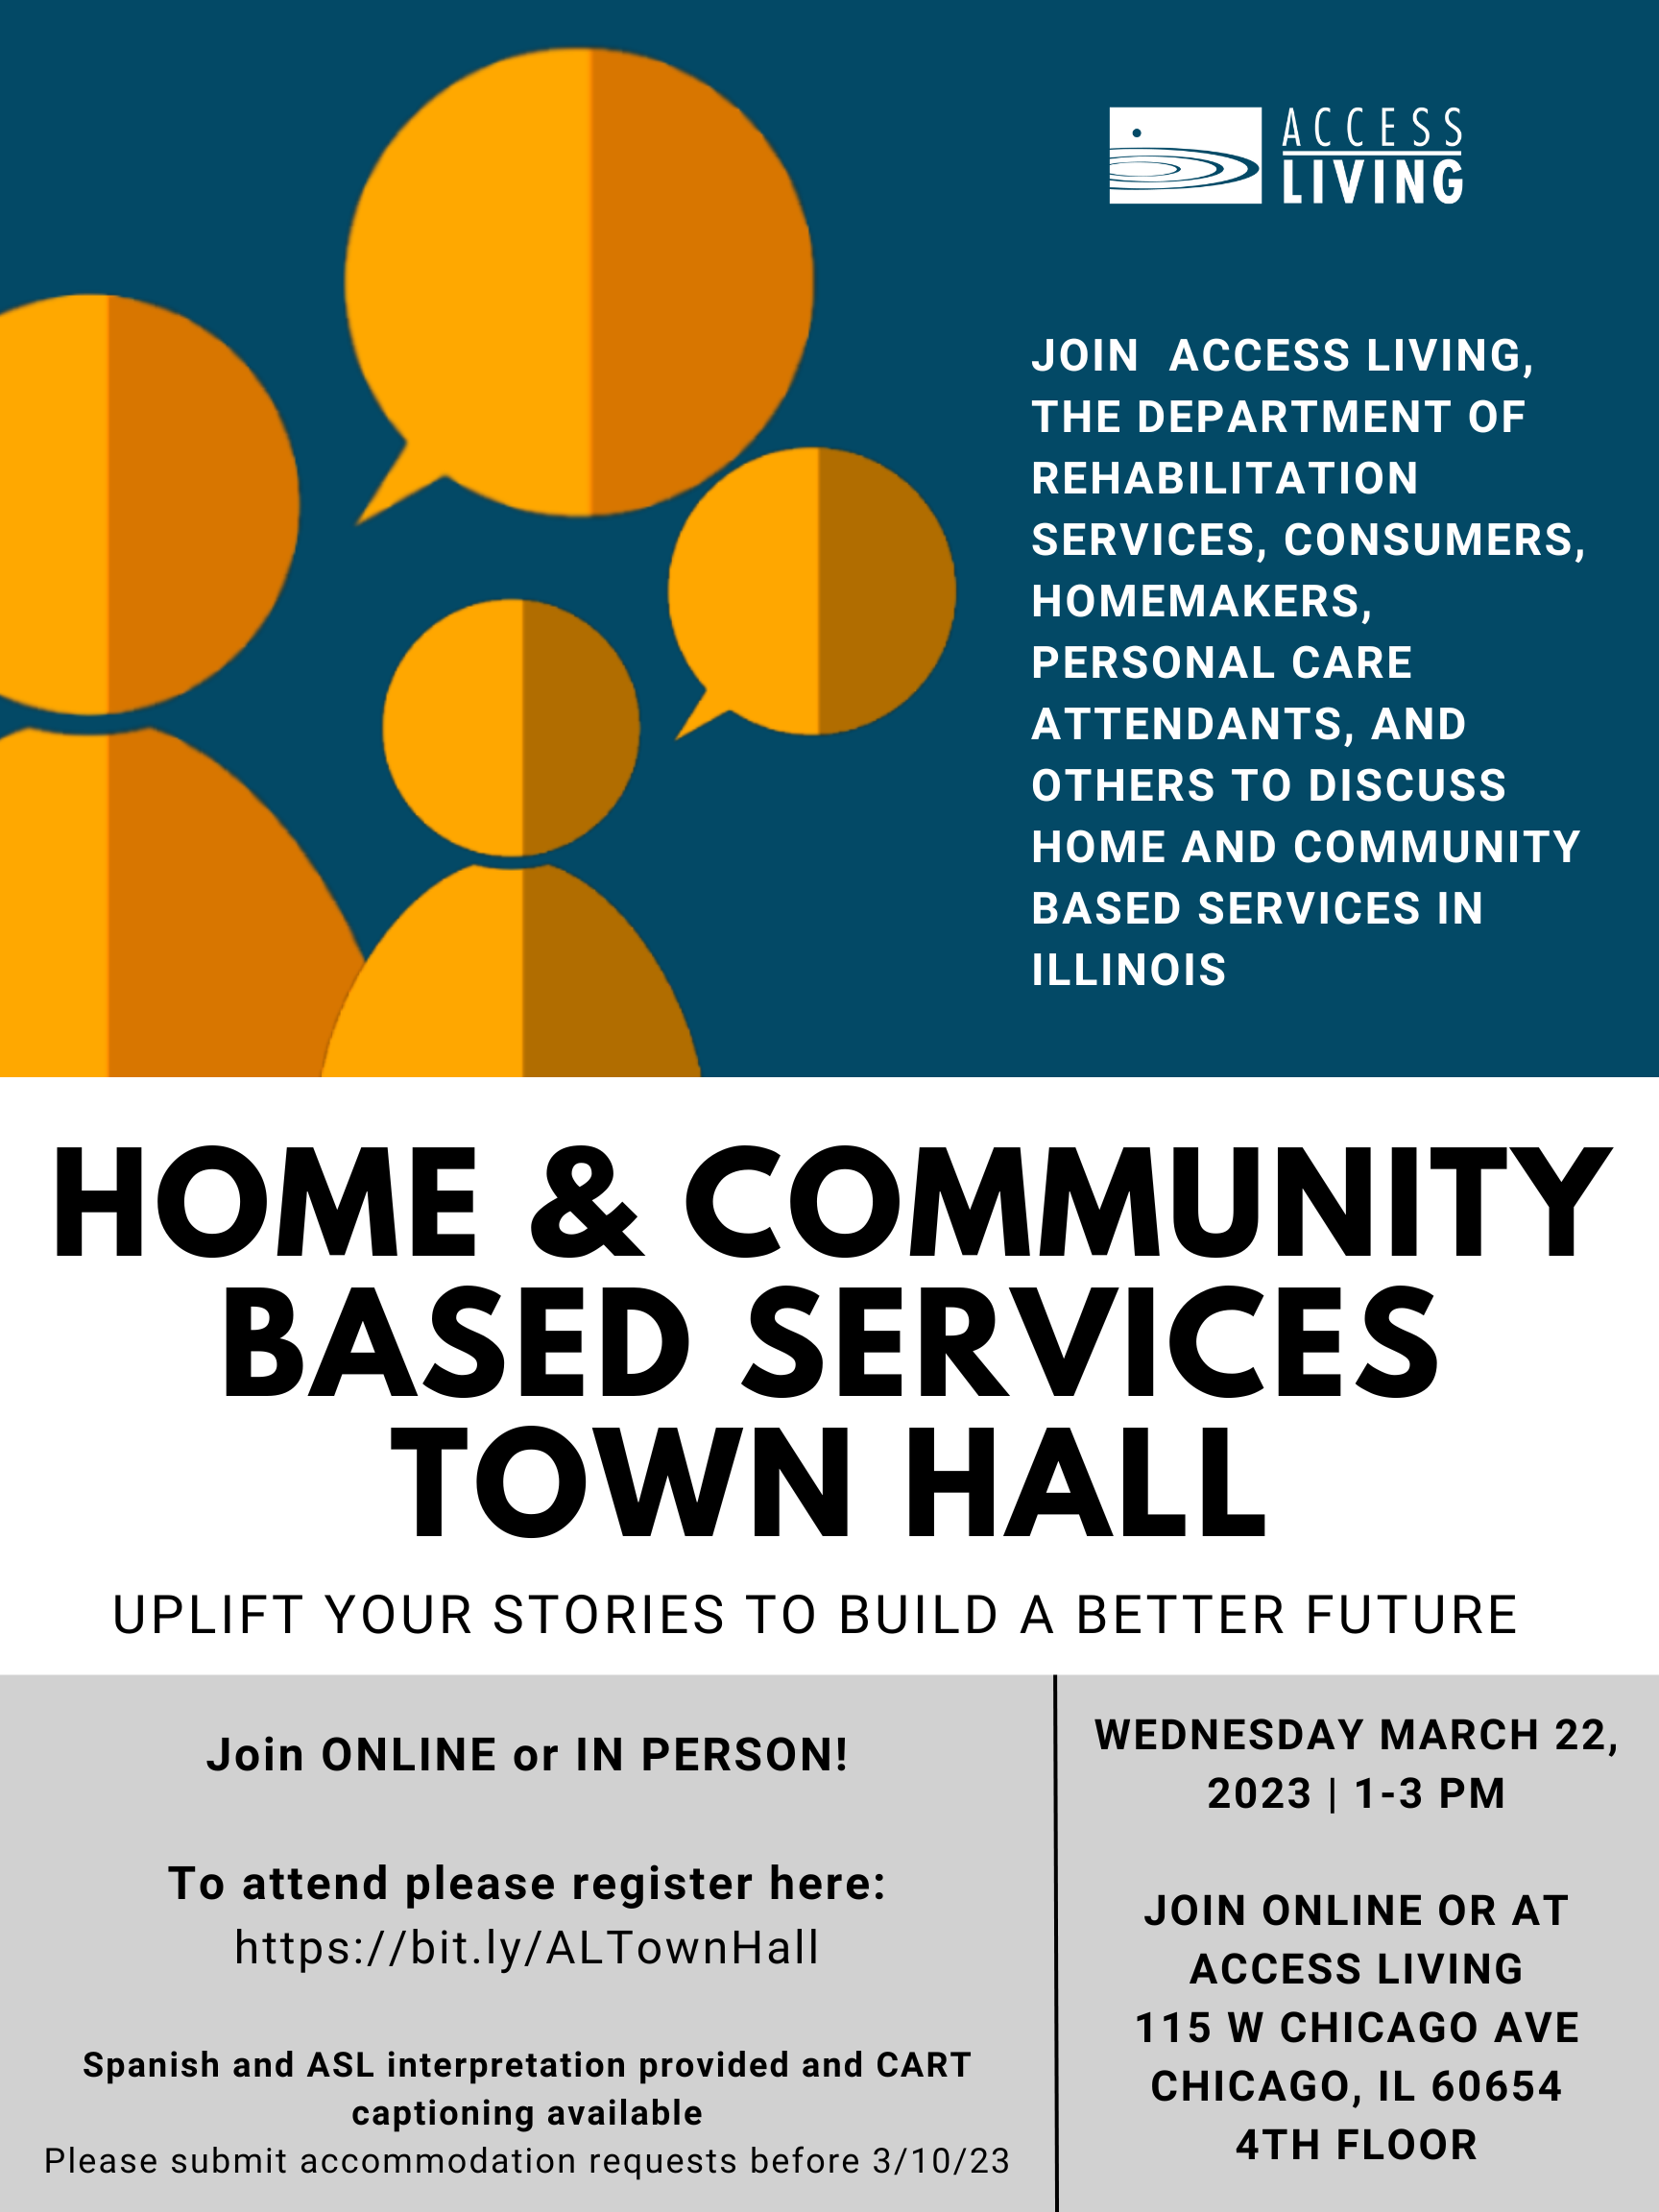 Flyer with drawing of two figures with conversation bubbles. Flyer text reads, "Join Access Living, the Department of Rehabilitation Services, Consumers, Homemakers, Personal Care Attendants, and others to discuss home and community-based services in Illinois. Home and Community Based Services Town Hall. Uplift your stories to build a better future. Join ONLINE or IN PERSON! To attend please register here [link] Spanish and ASL interpretation provided and CARET captioning available. Please submit accommodation requewsts before 3/10/23. Wednesday March 22, 2023, 1-3PM. Join online or at Access Living 115 W. Chicago Ave, Chicago, IL 60654. 4th Floor."